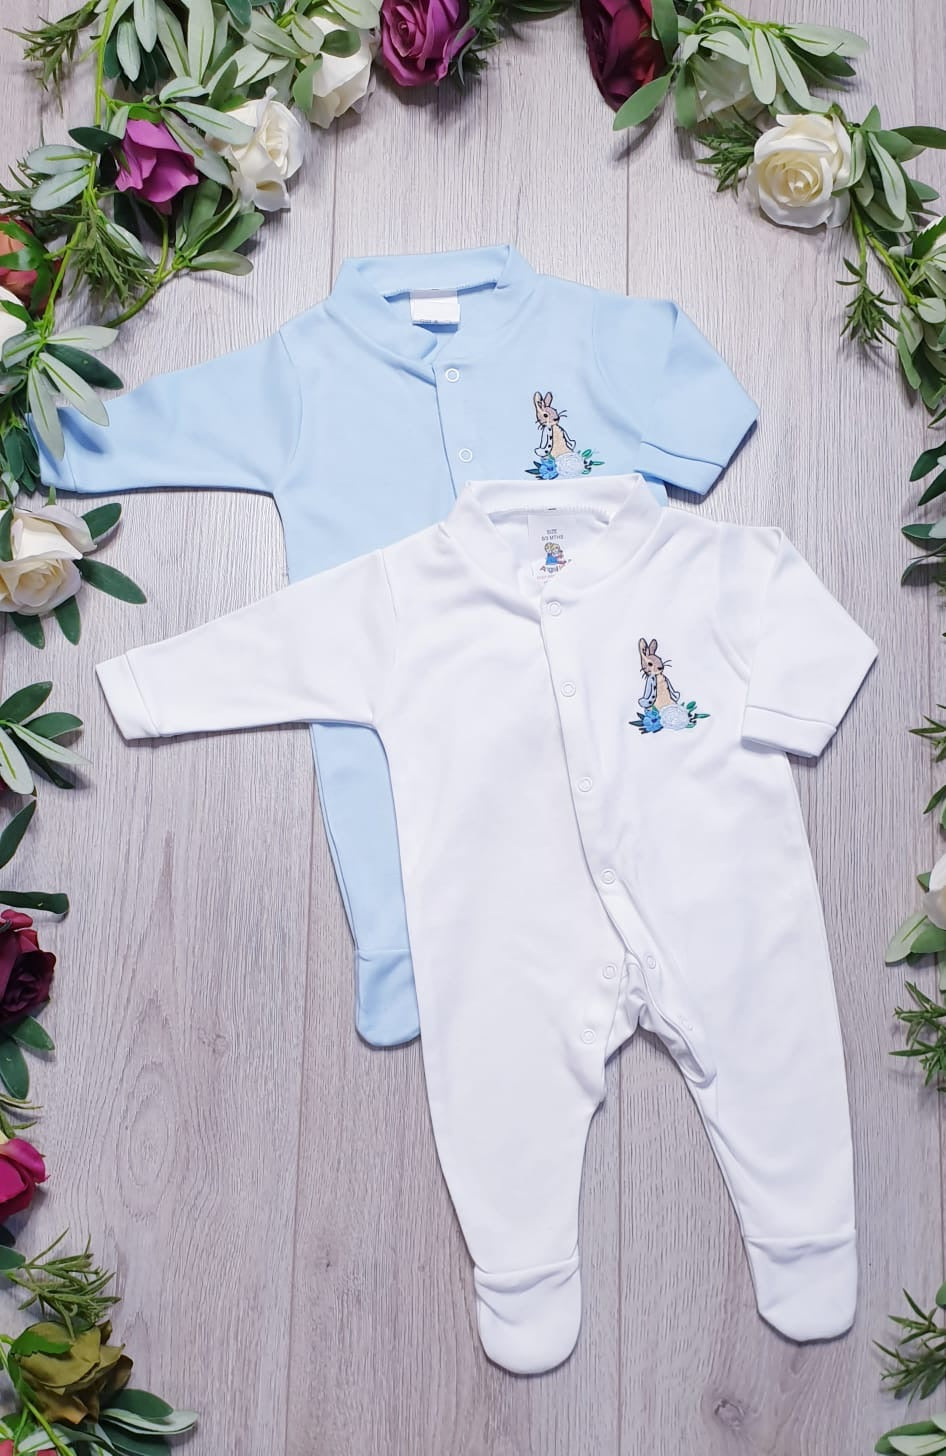 peter rabbit all in one babygrow babywear beatrix potter collection peter rabbit 